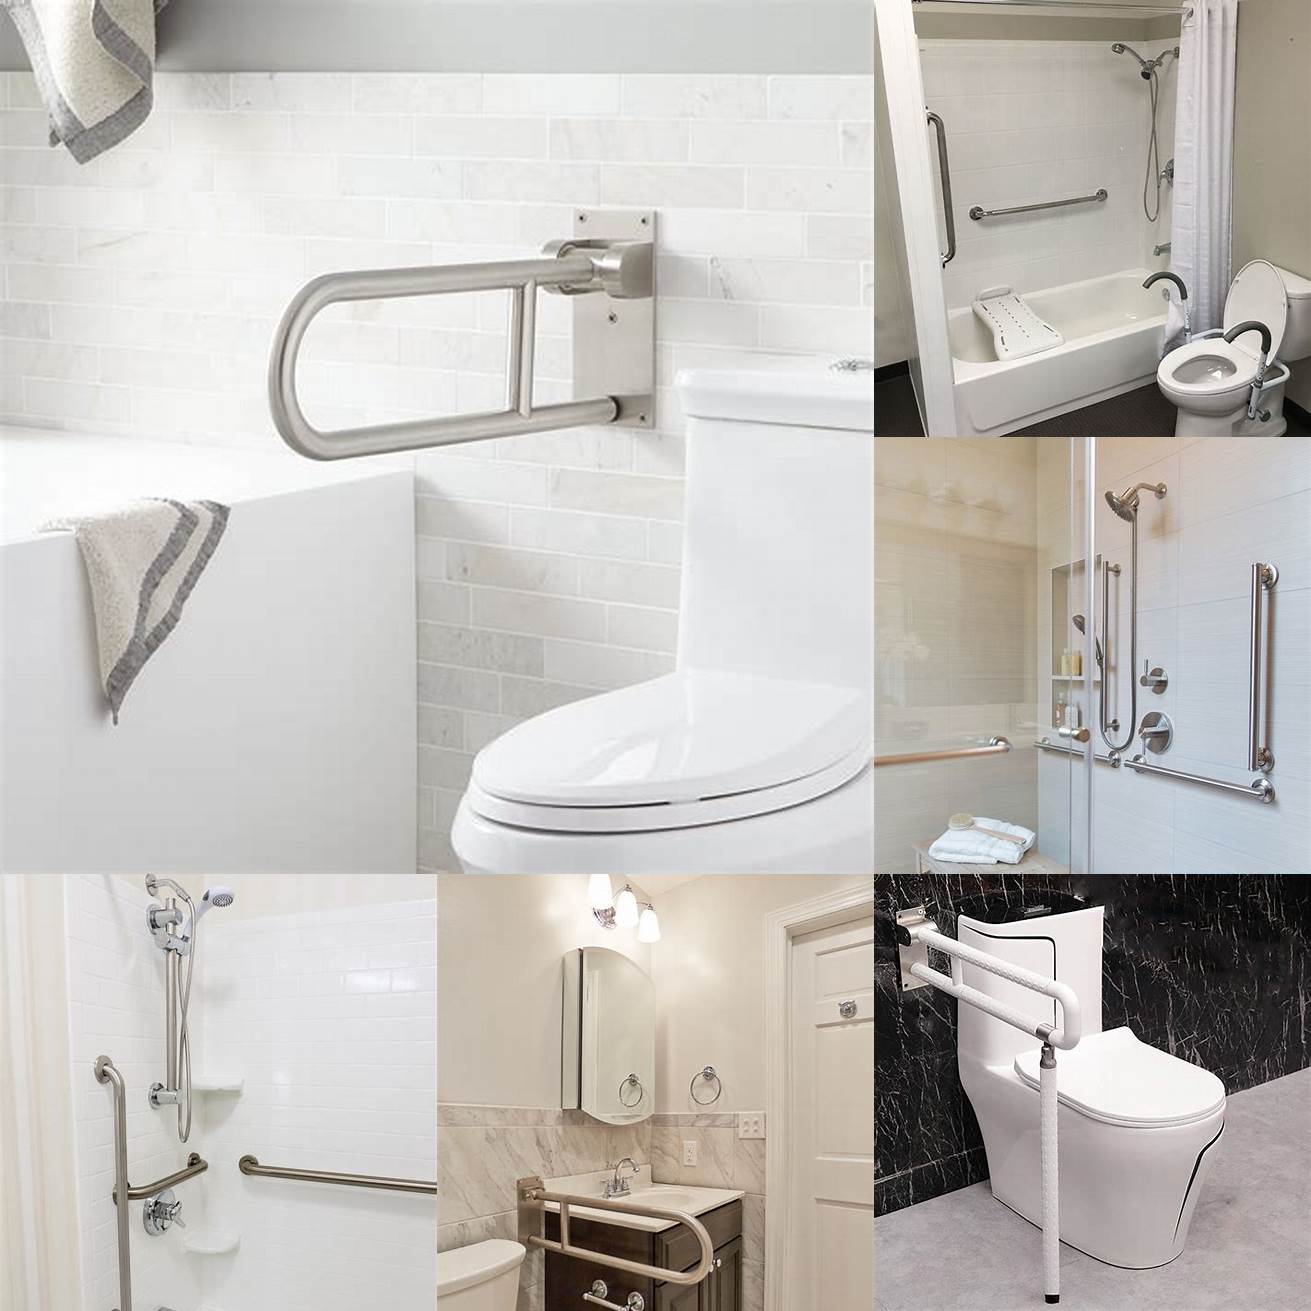 A handicap bathroom vanity with built-in grab bars for added safety